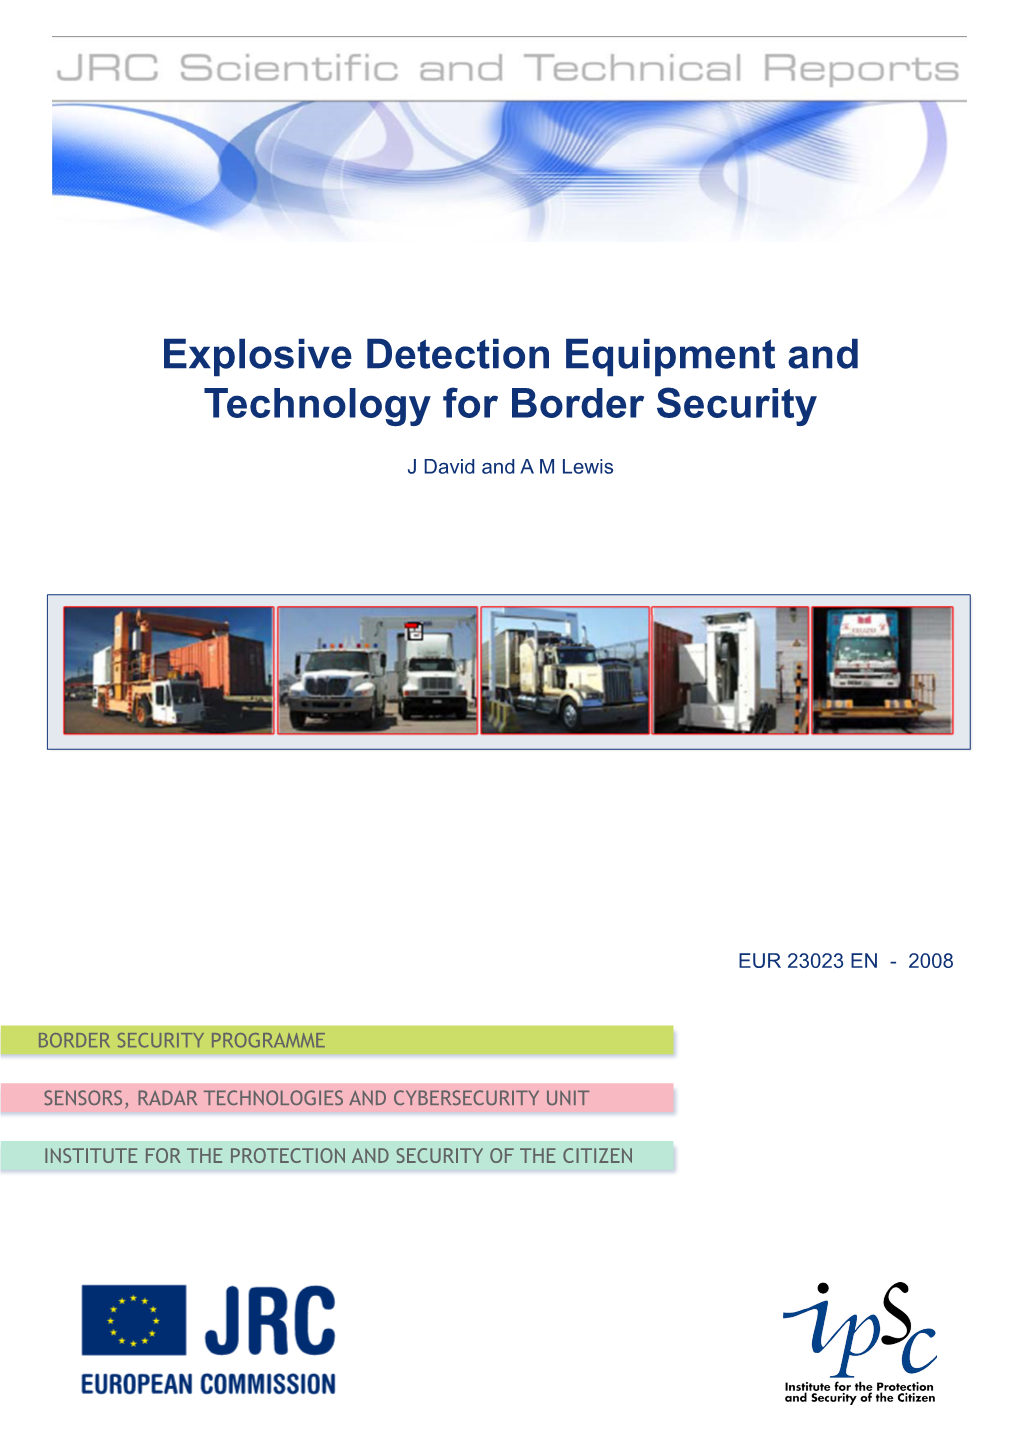 Explosive Detection Equipment and Technology for Border Security